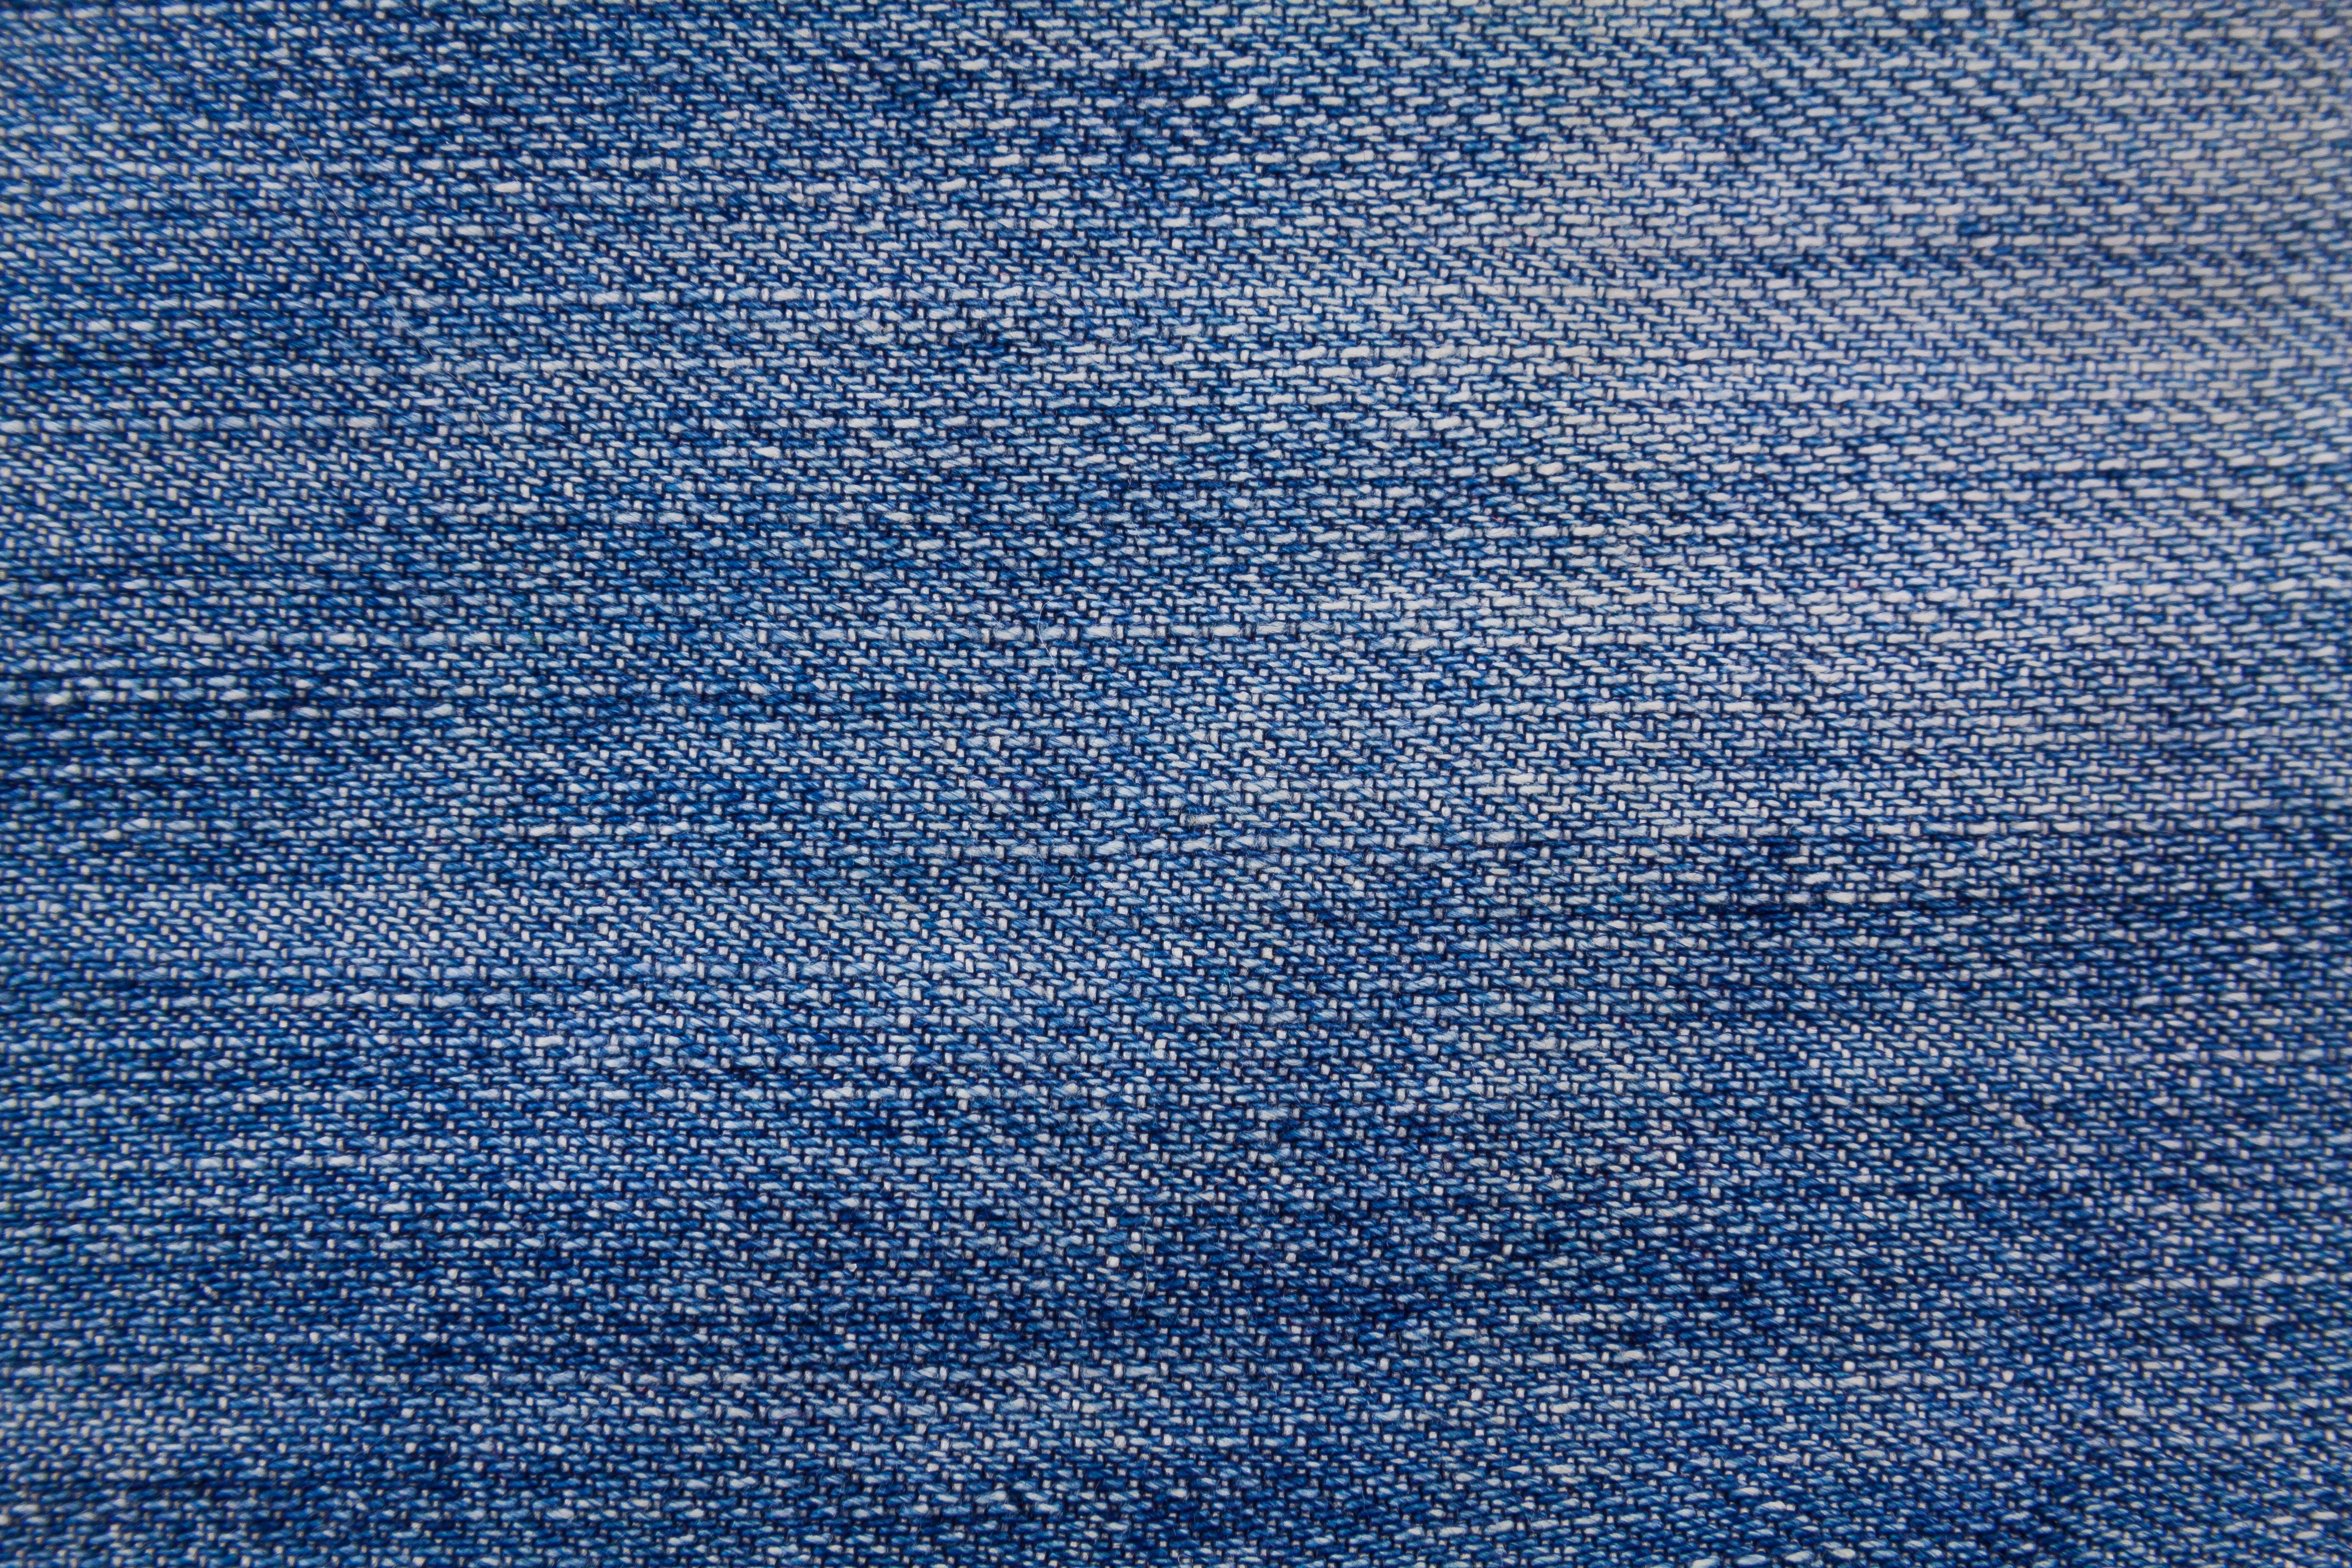 Wallpaper With Denim Fabric Texture Image